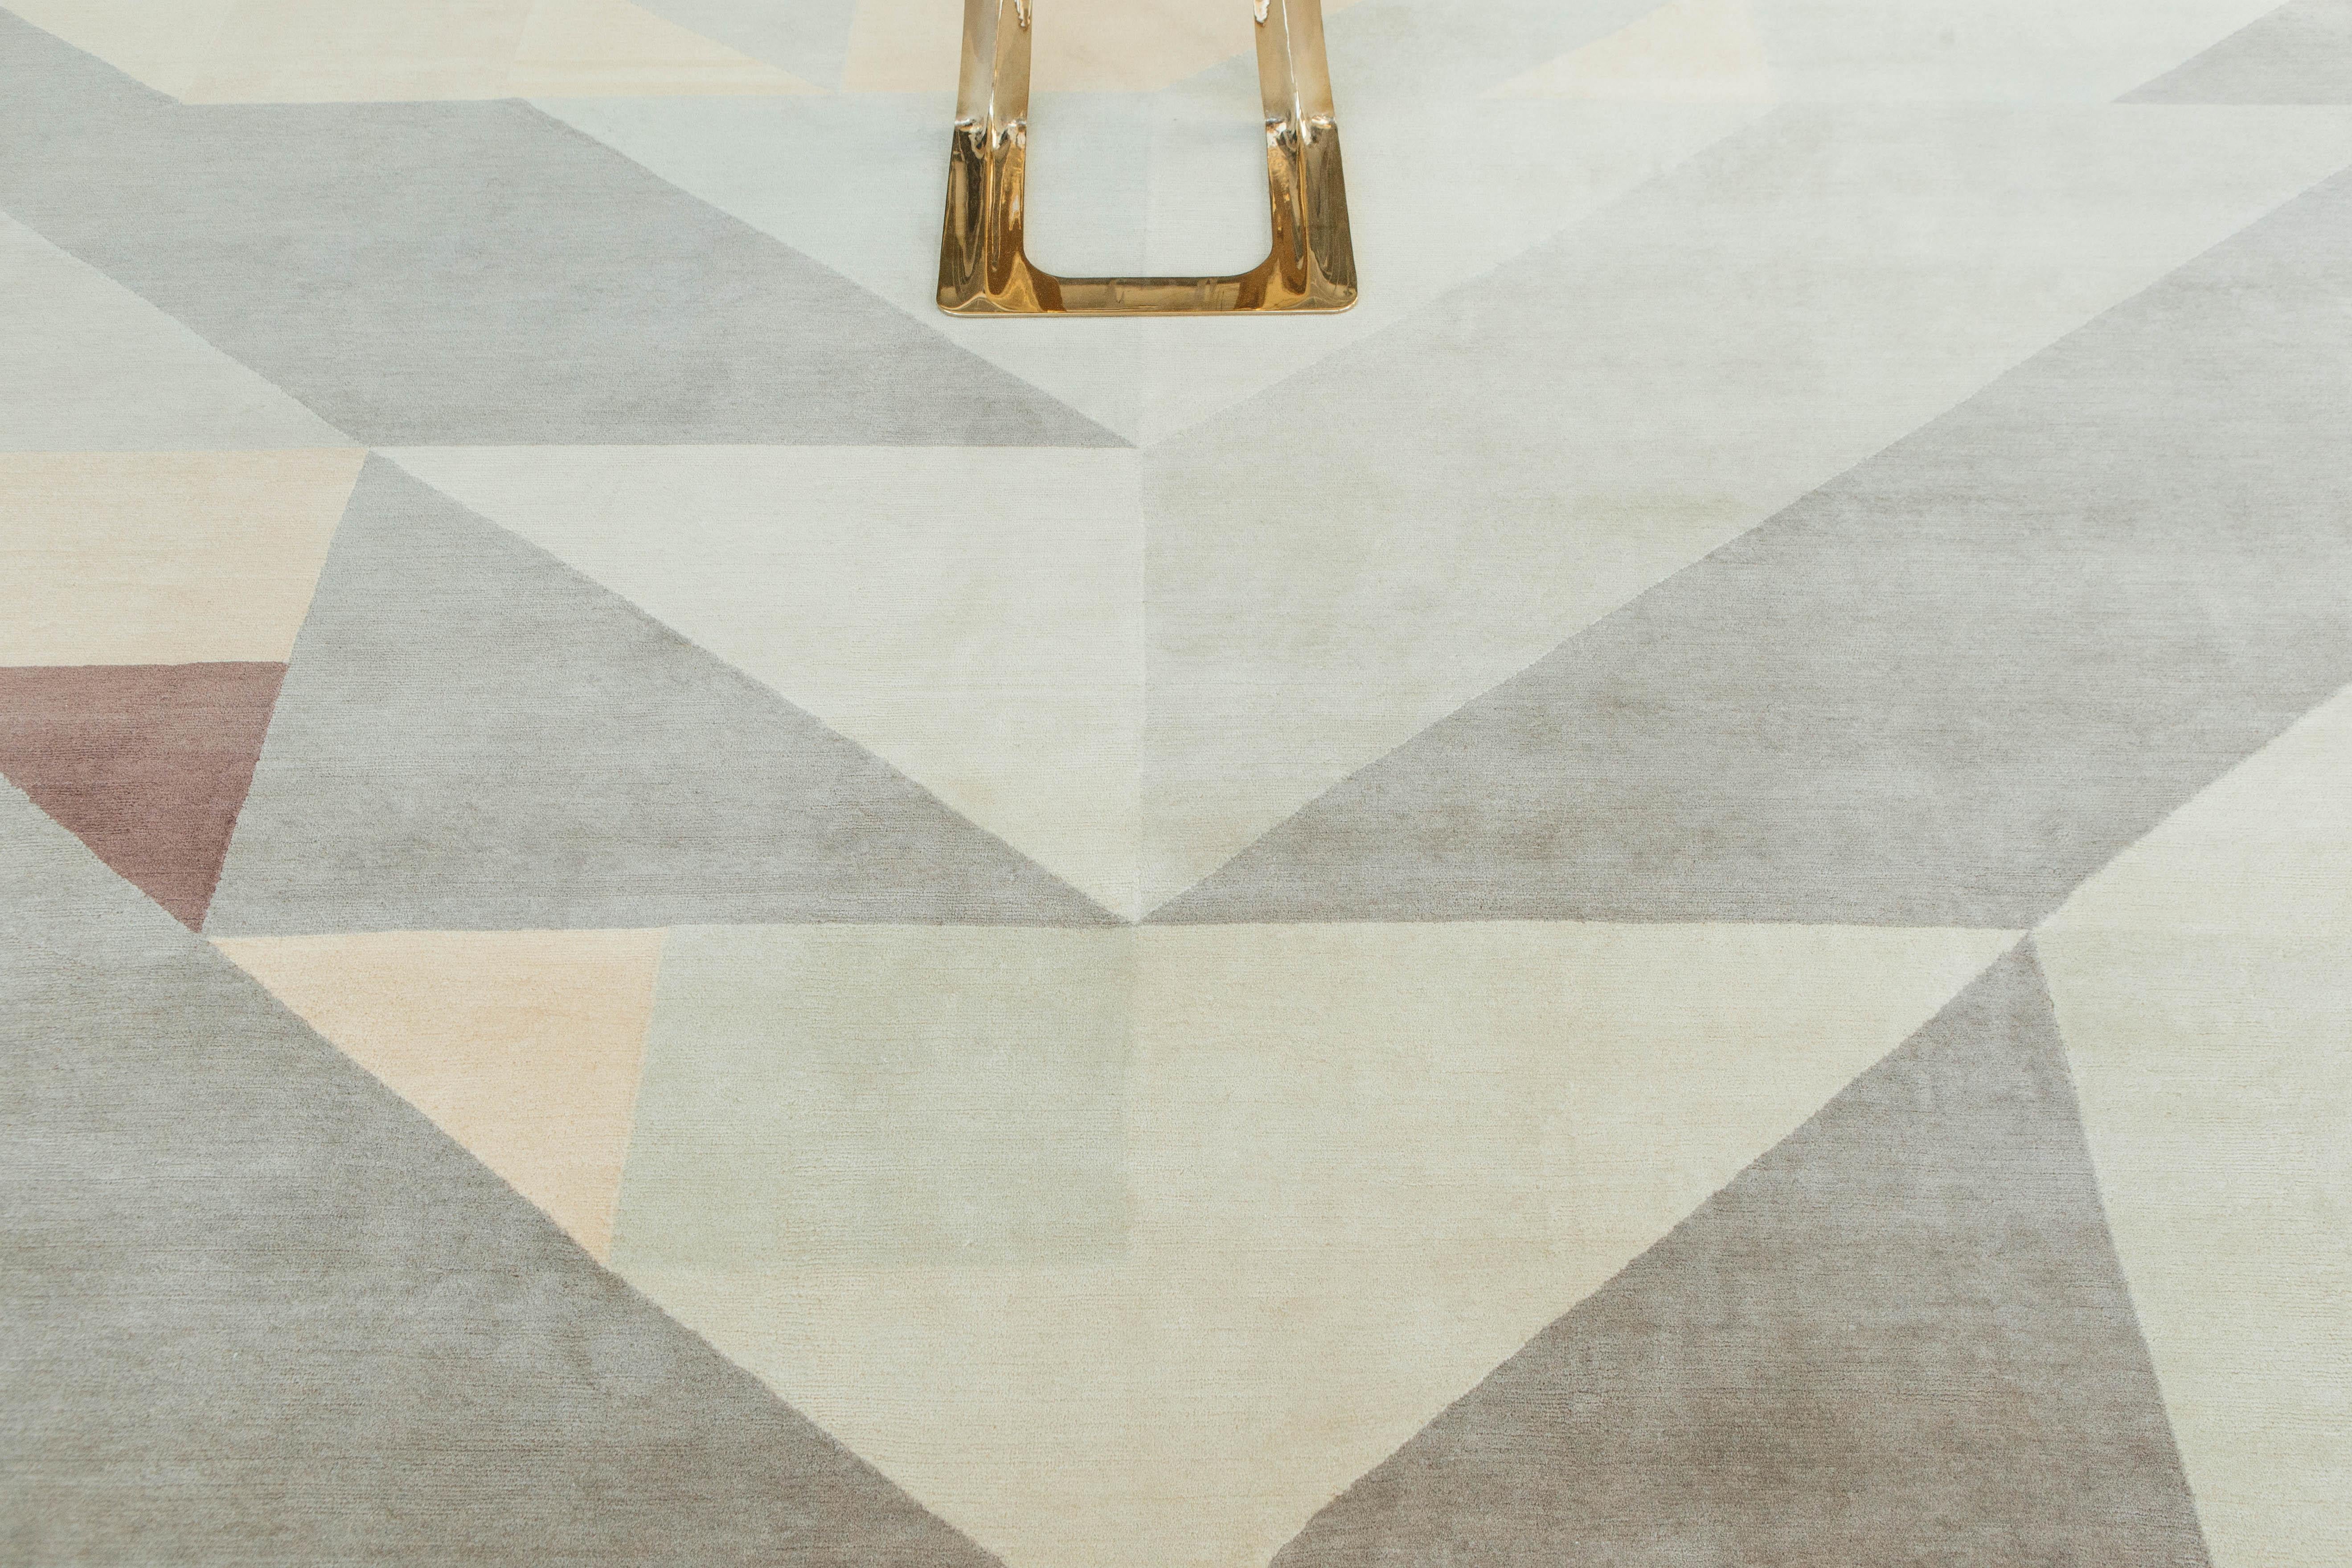 Inspired by a small tile mosaic that shrouds the espresso machine at one or our favorite bars in Firenze. Our 'Picchi' rug is a joyful expression born of a visceral gratitude. Handwoven of luxurious wool. 

The Baci Collection by FORM Design